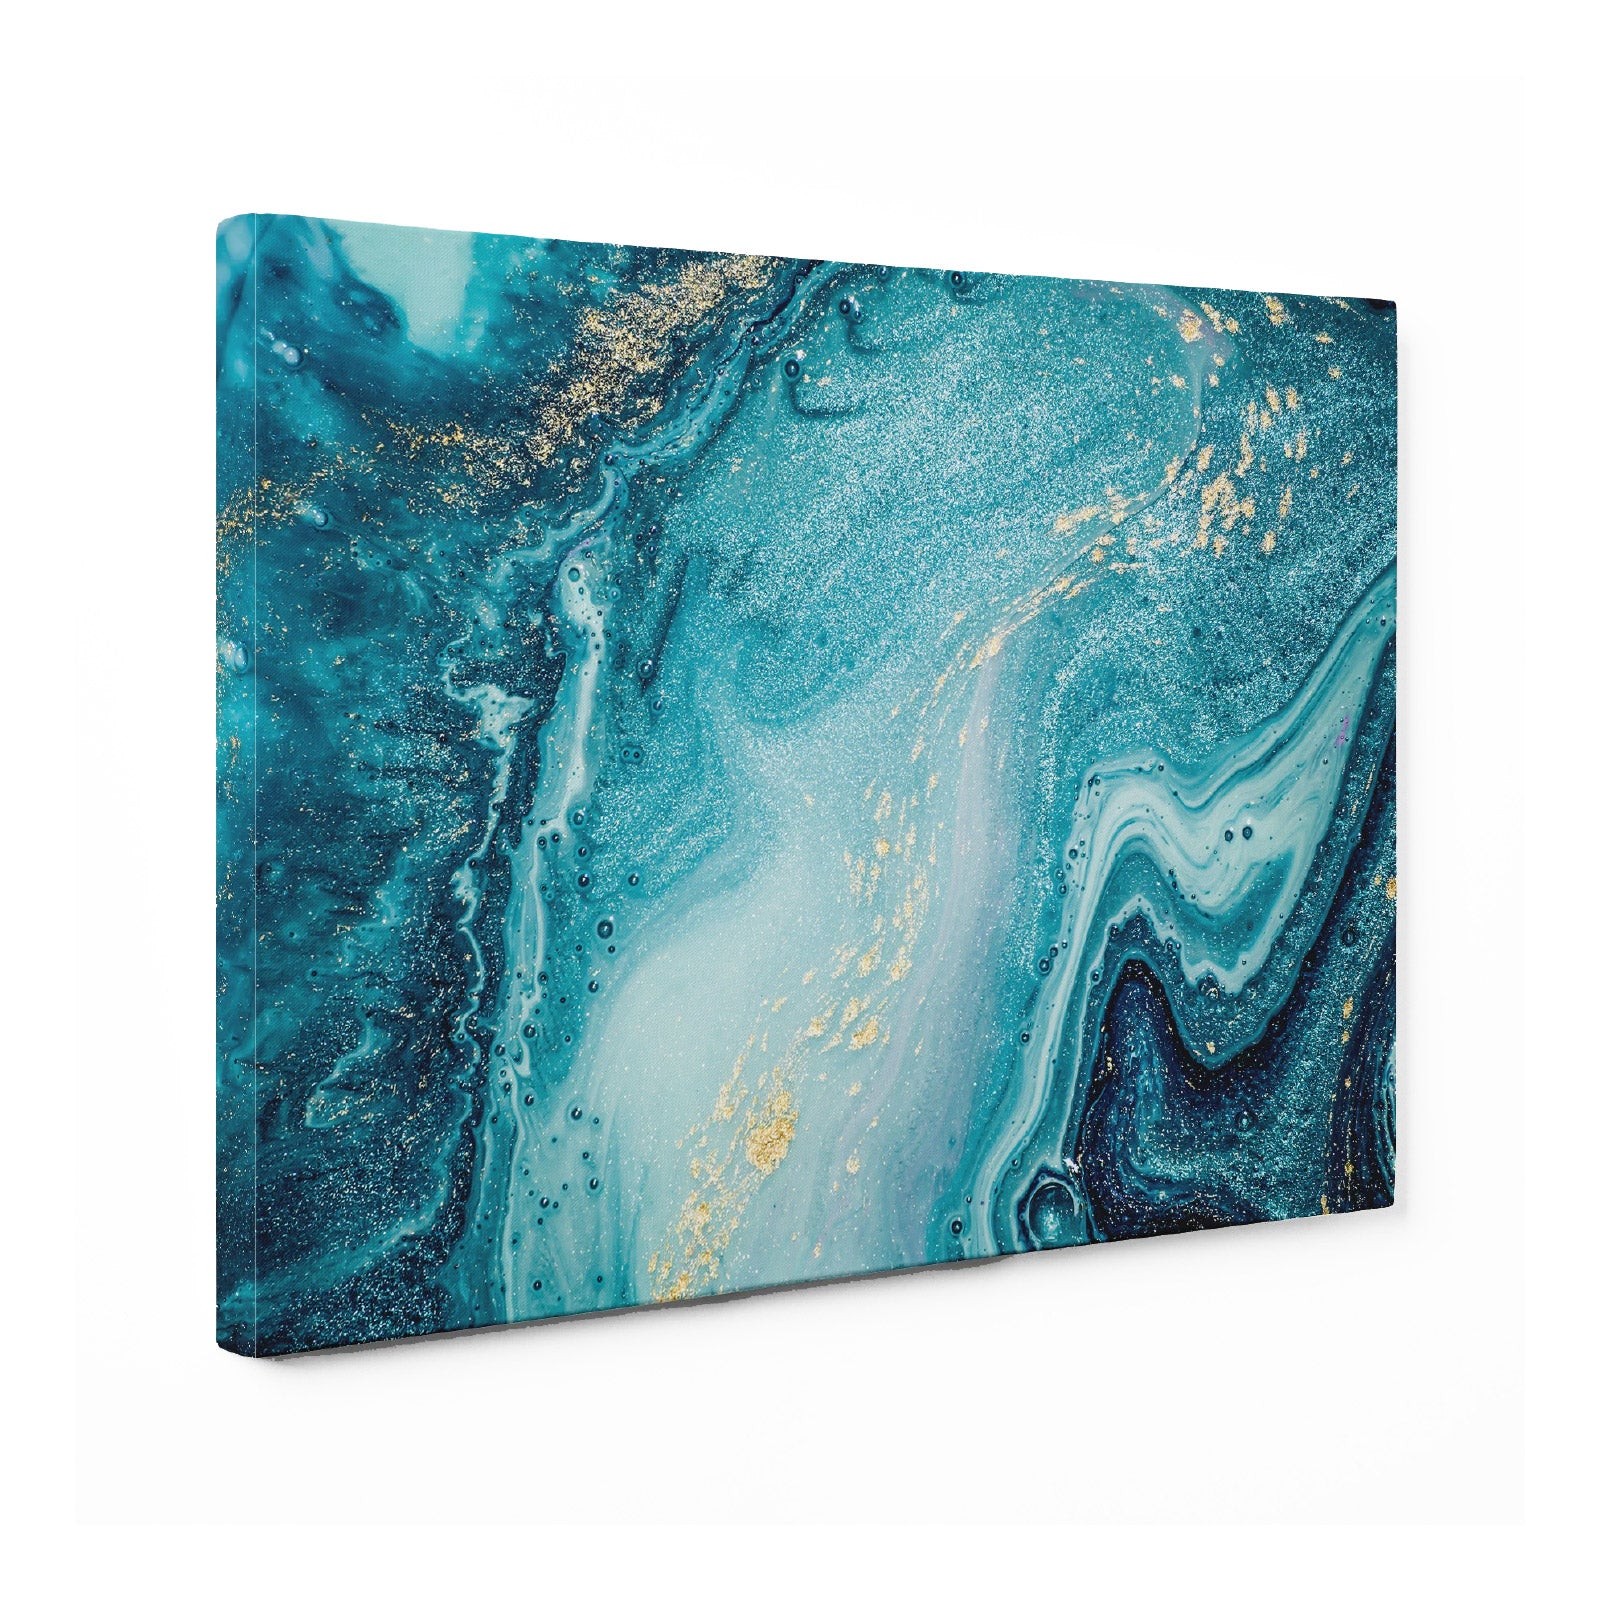 Canvas Prints Canada™ - High Quality & Best Canvas Printing Canada